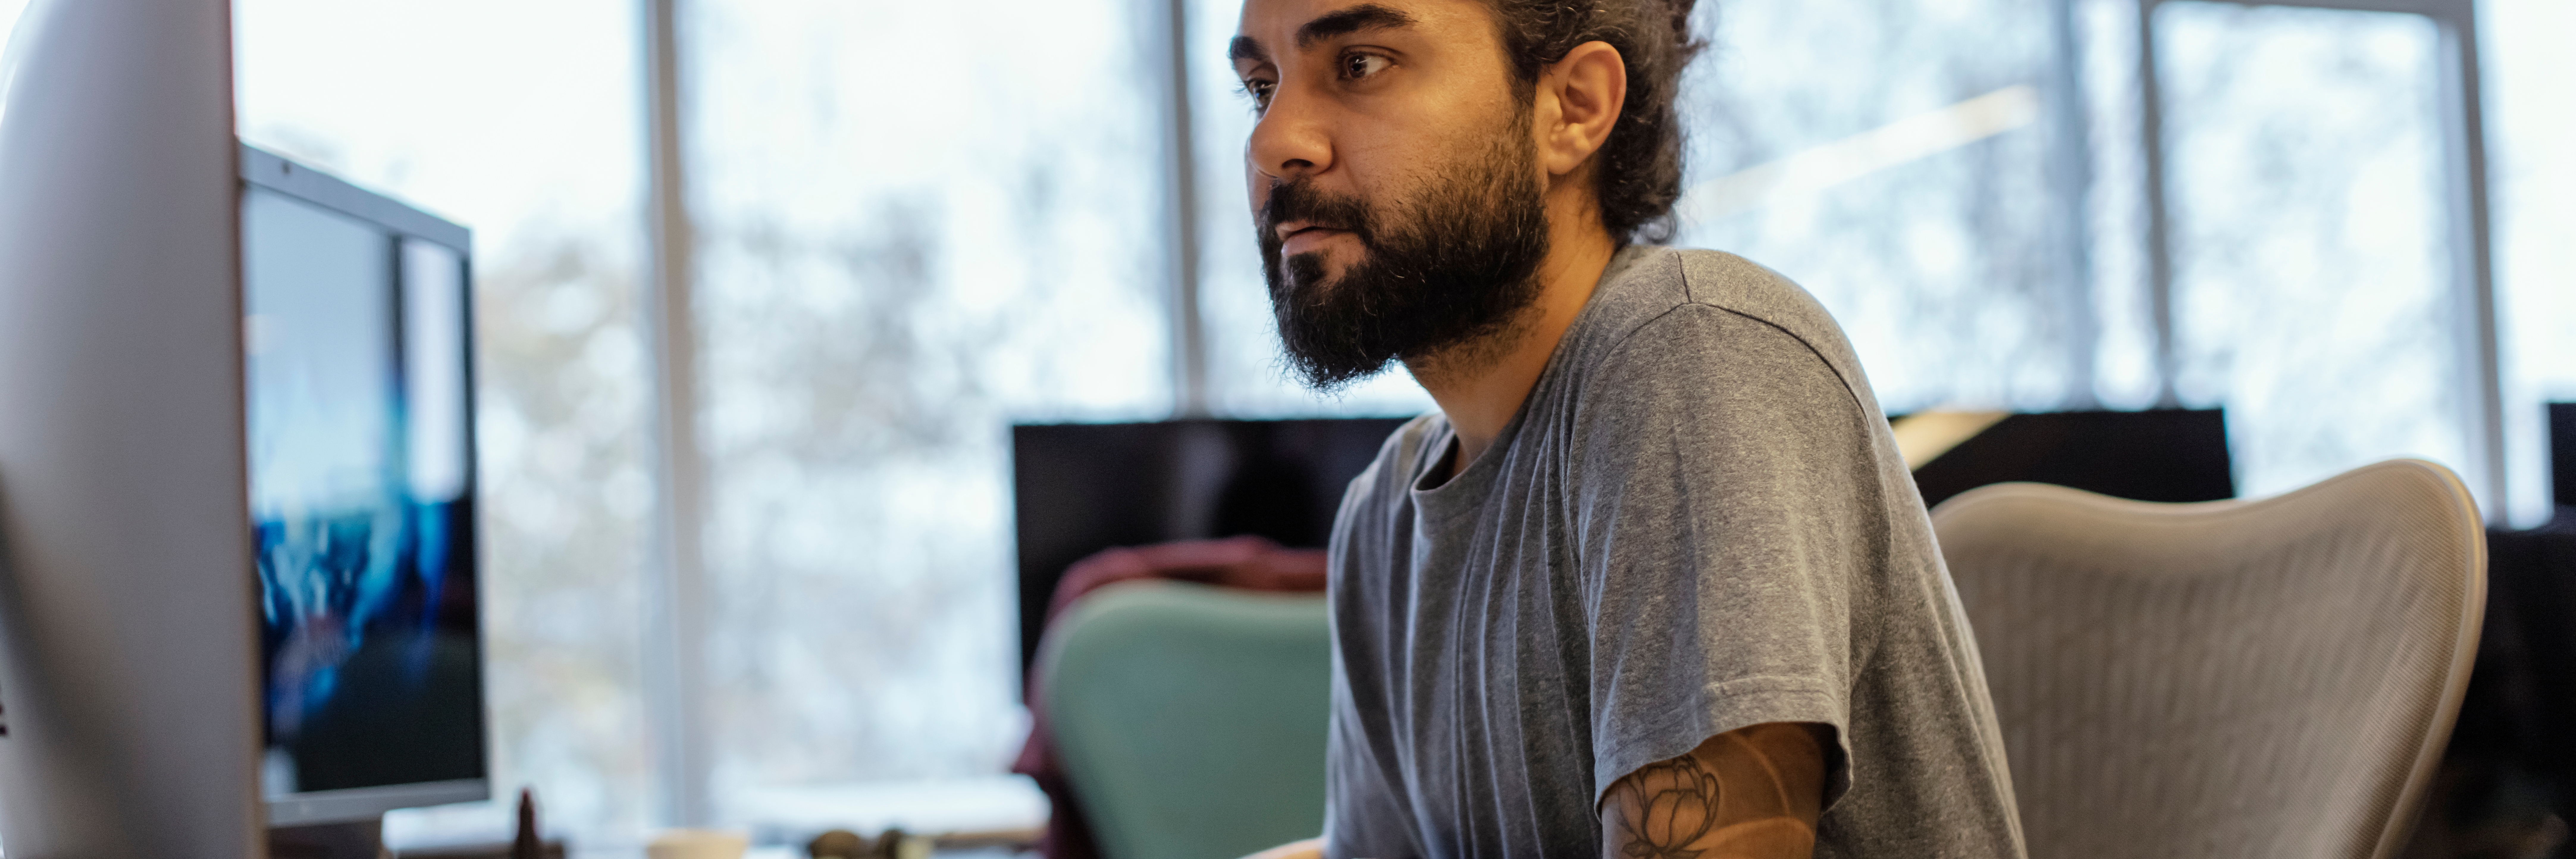 Portrait of Stylish Hipster Guy with Tattoo on Hand, Writes Notes in Computer at Office - stock photo